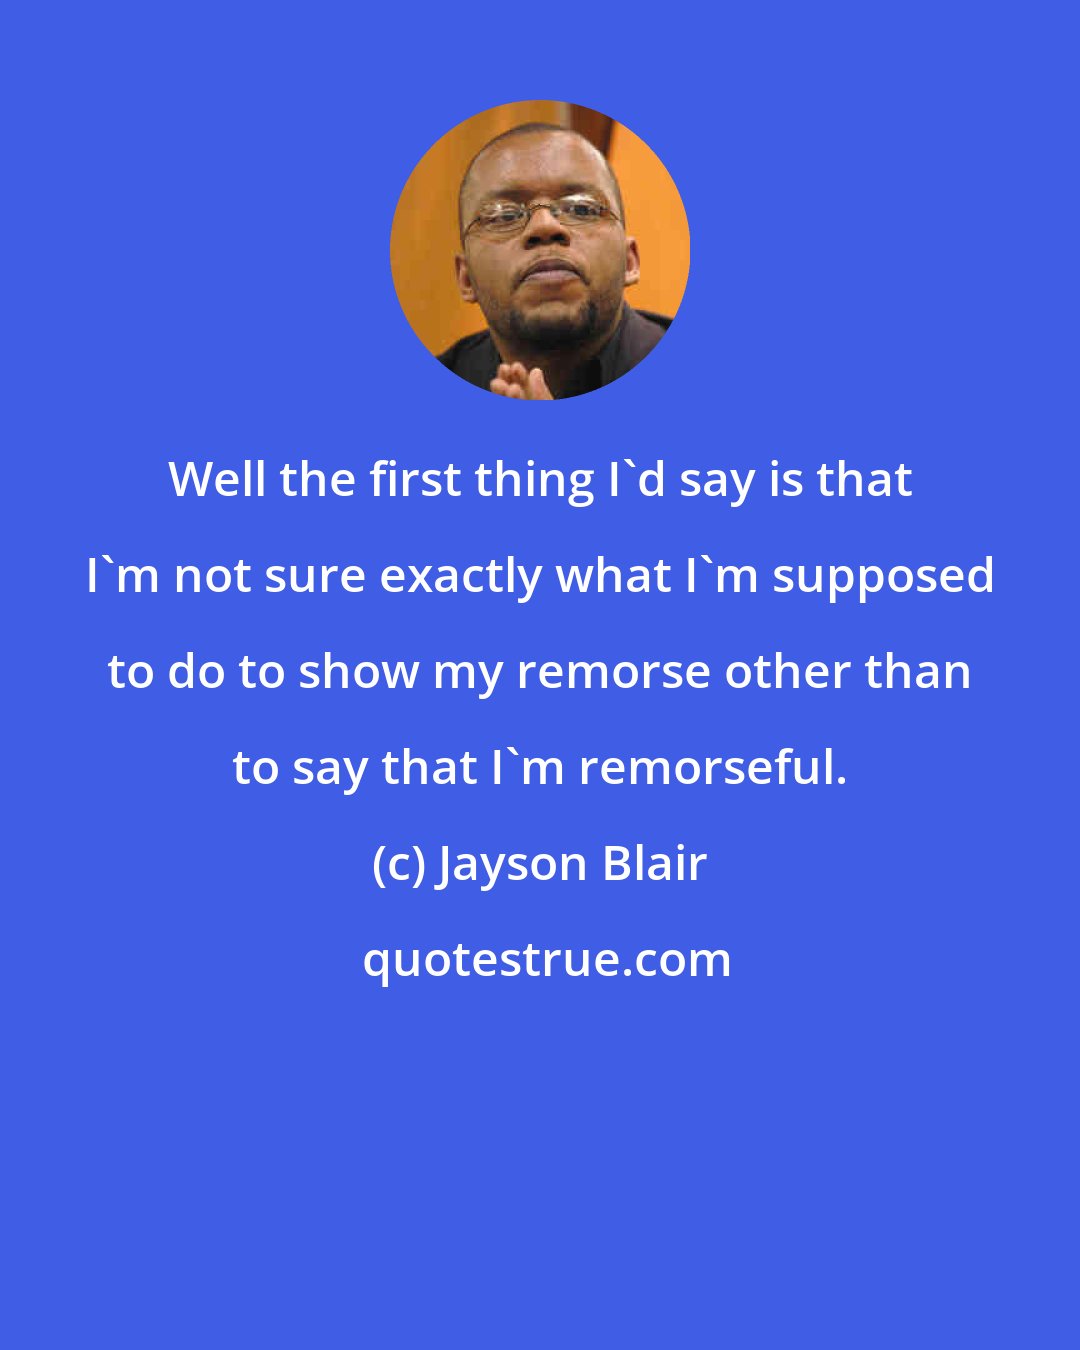 Jayson Blair: Well the first thing I'd say is that I'm not sure exactly what I'm supposed to do to show my remorse other than to say that I'm remorseful.